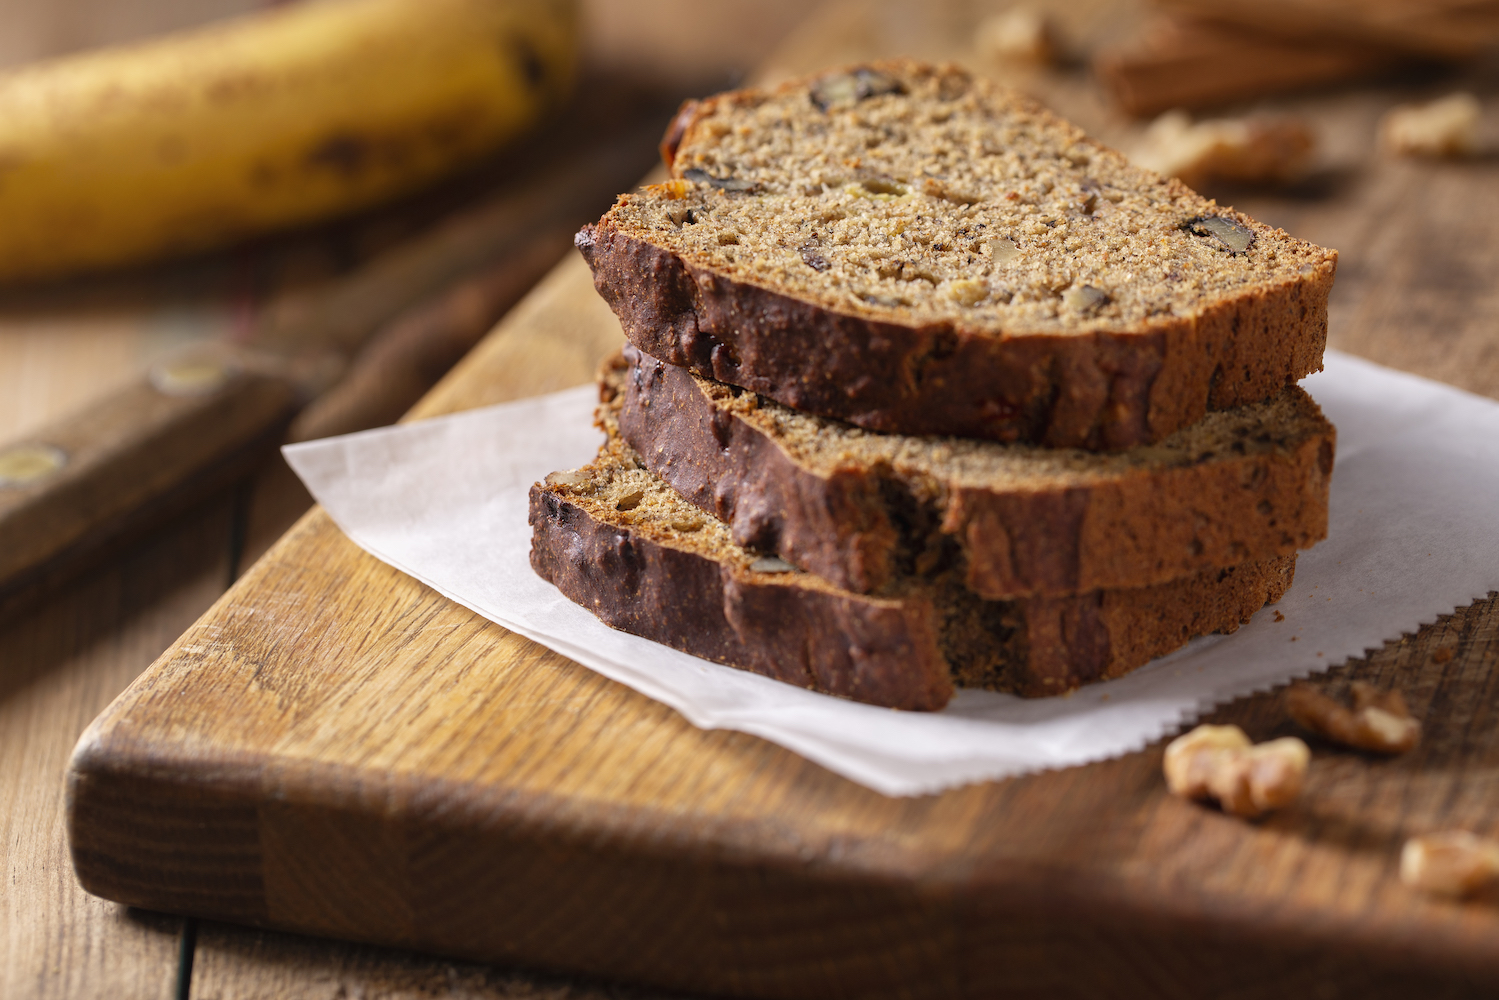 Slices of fresh baked banana nut bread with walnuts on rustic wood cutting board